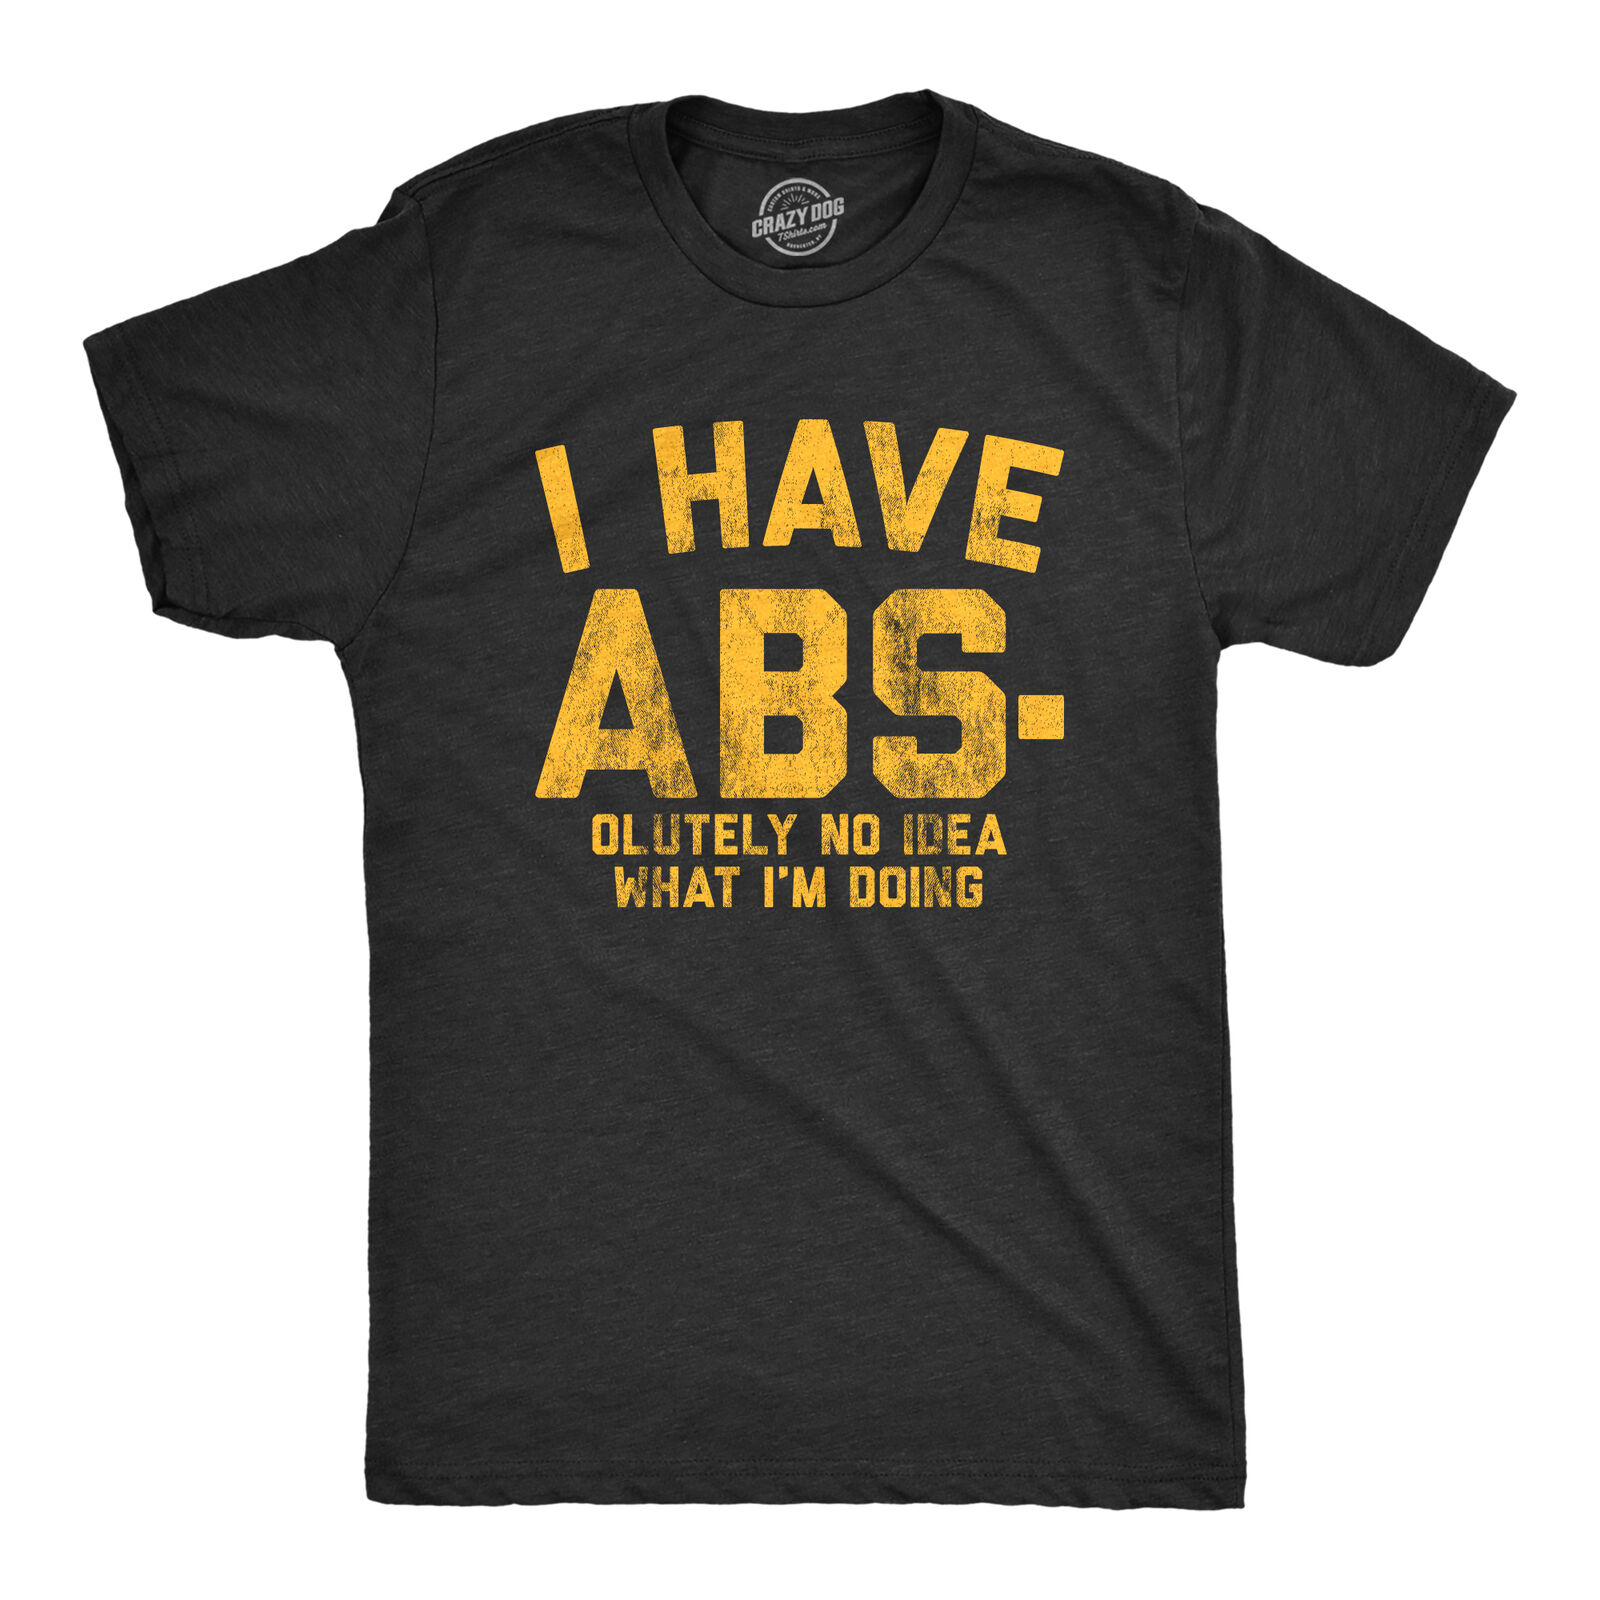 Mens I Have Abs-olutely No Idea What I\'m Doing Tshirt Funny Workout Fitness